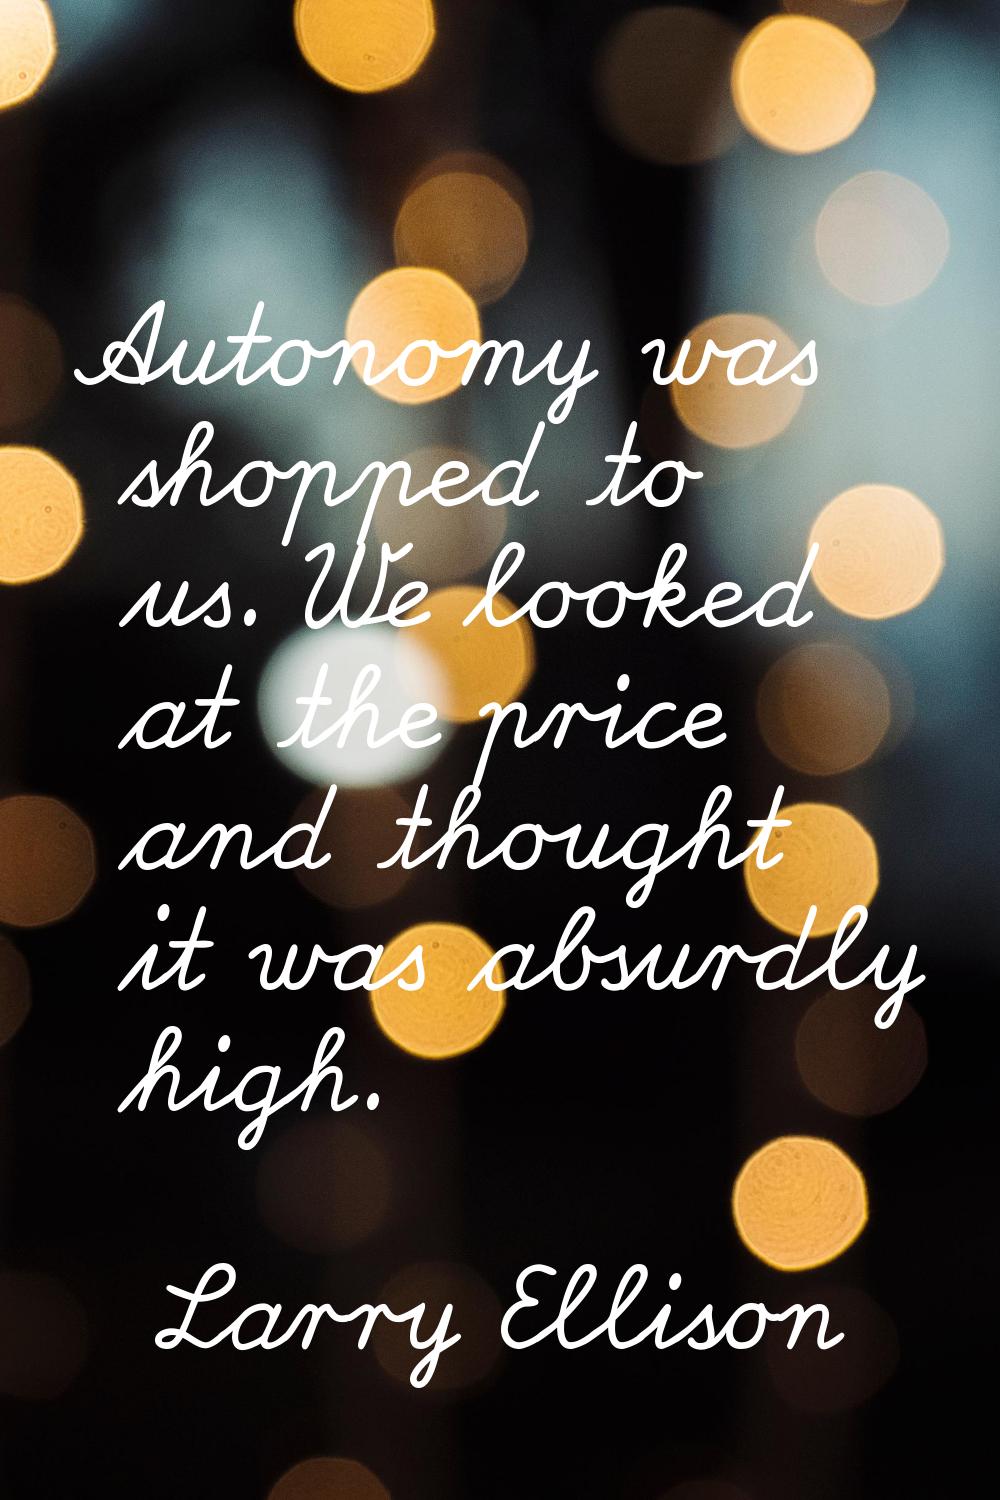 Autonomy was shopped to us. We looked at the price and thought it was absurdly high.